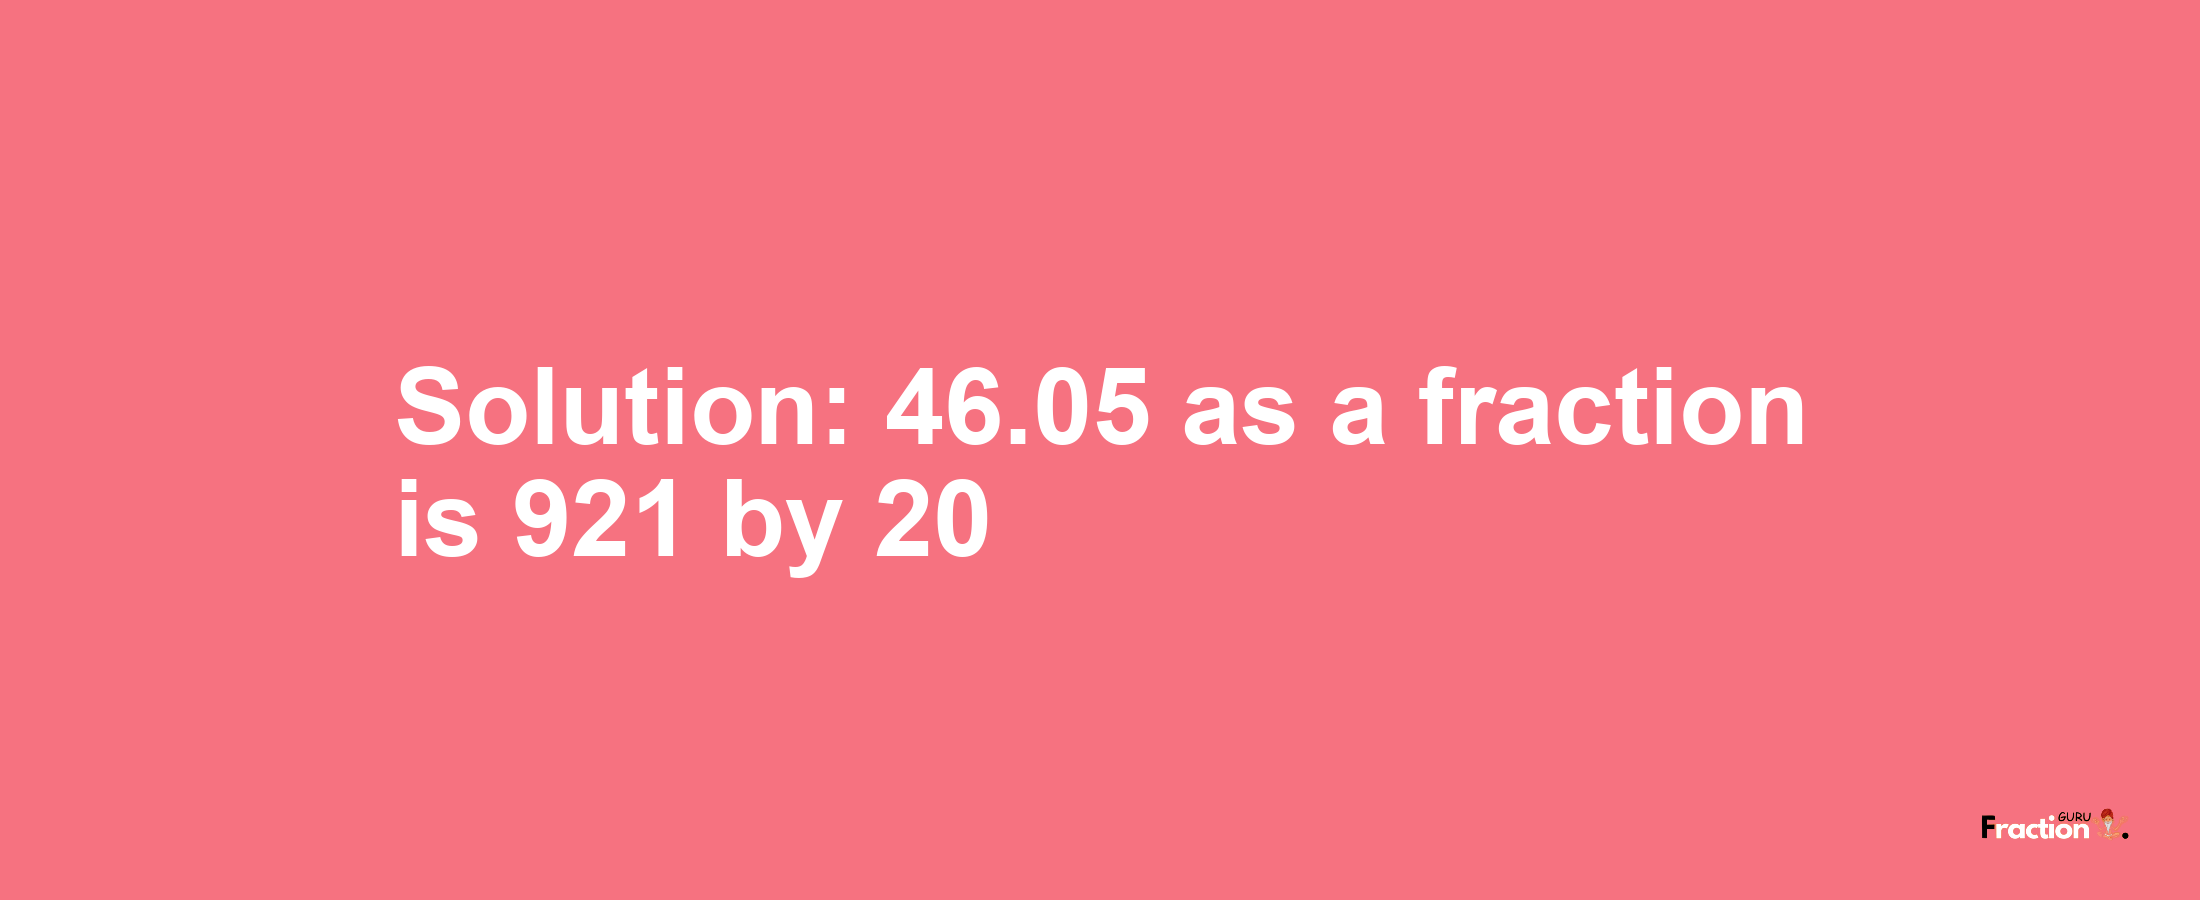 Solution:46.05 as a fraction is 921/20